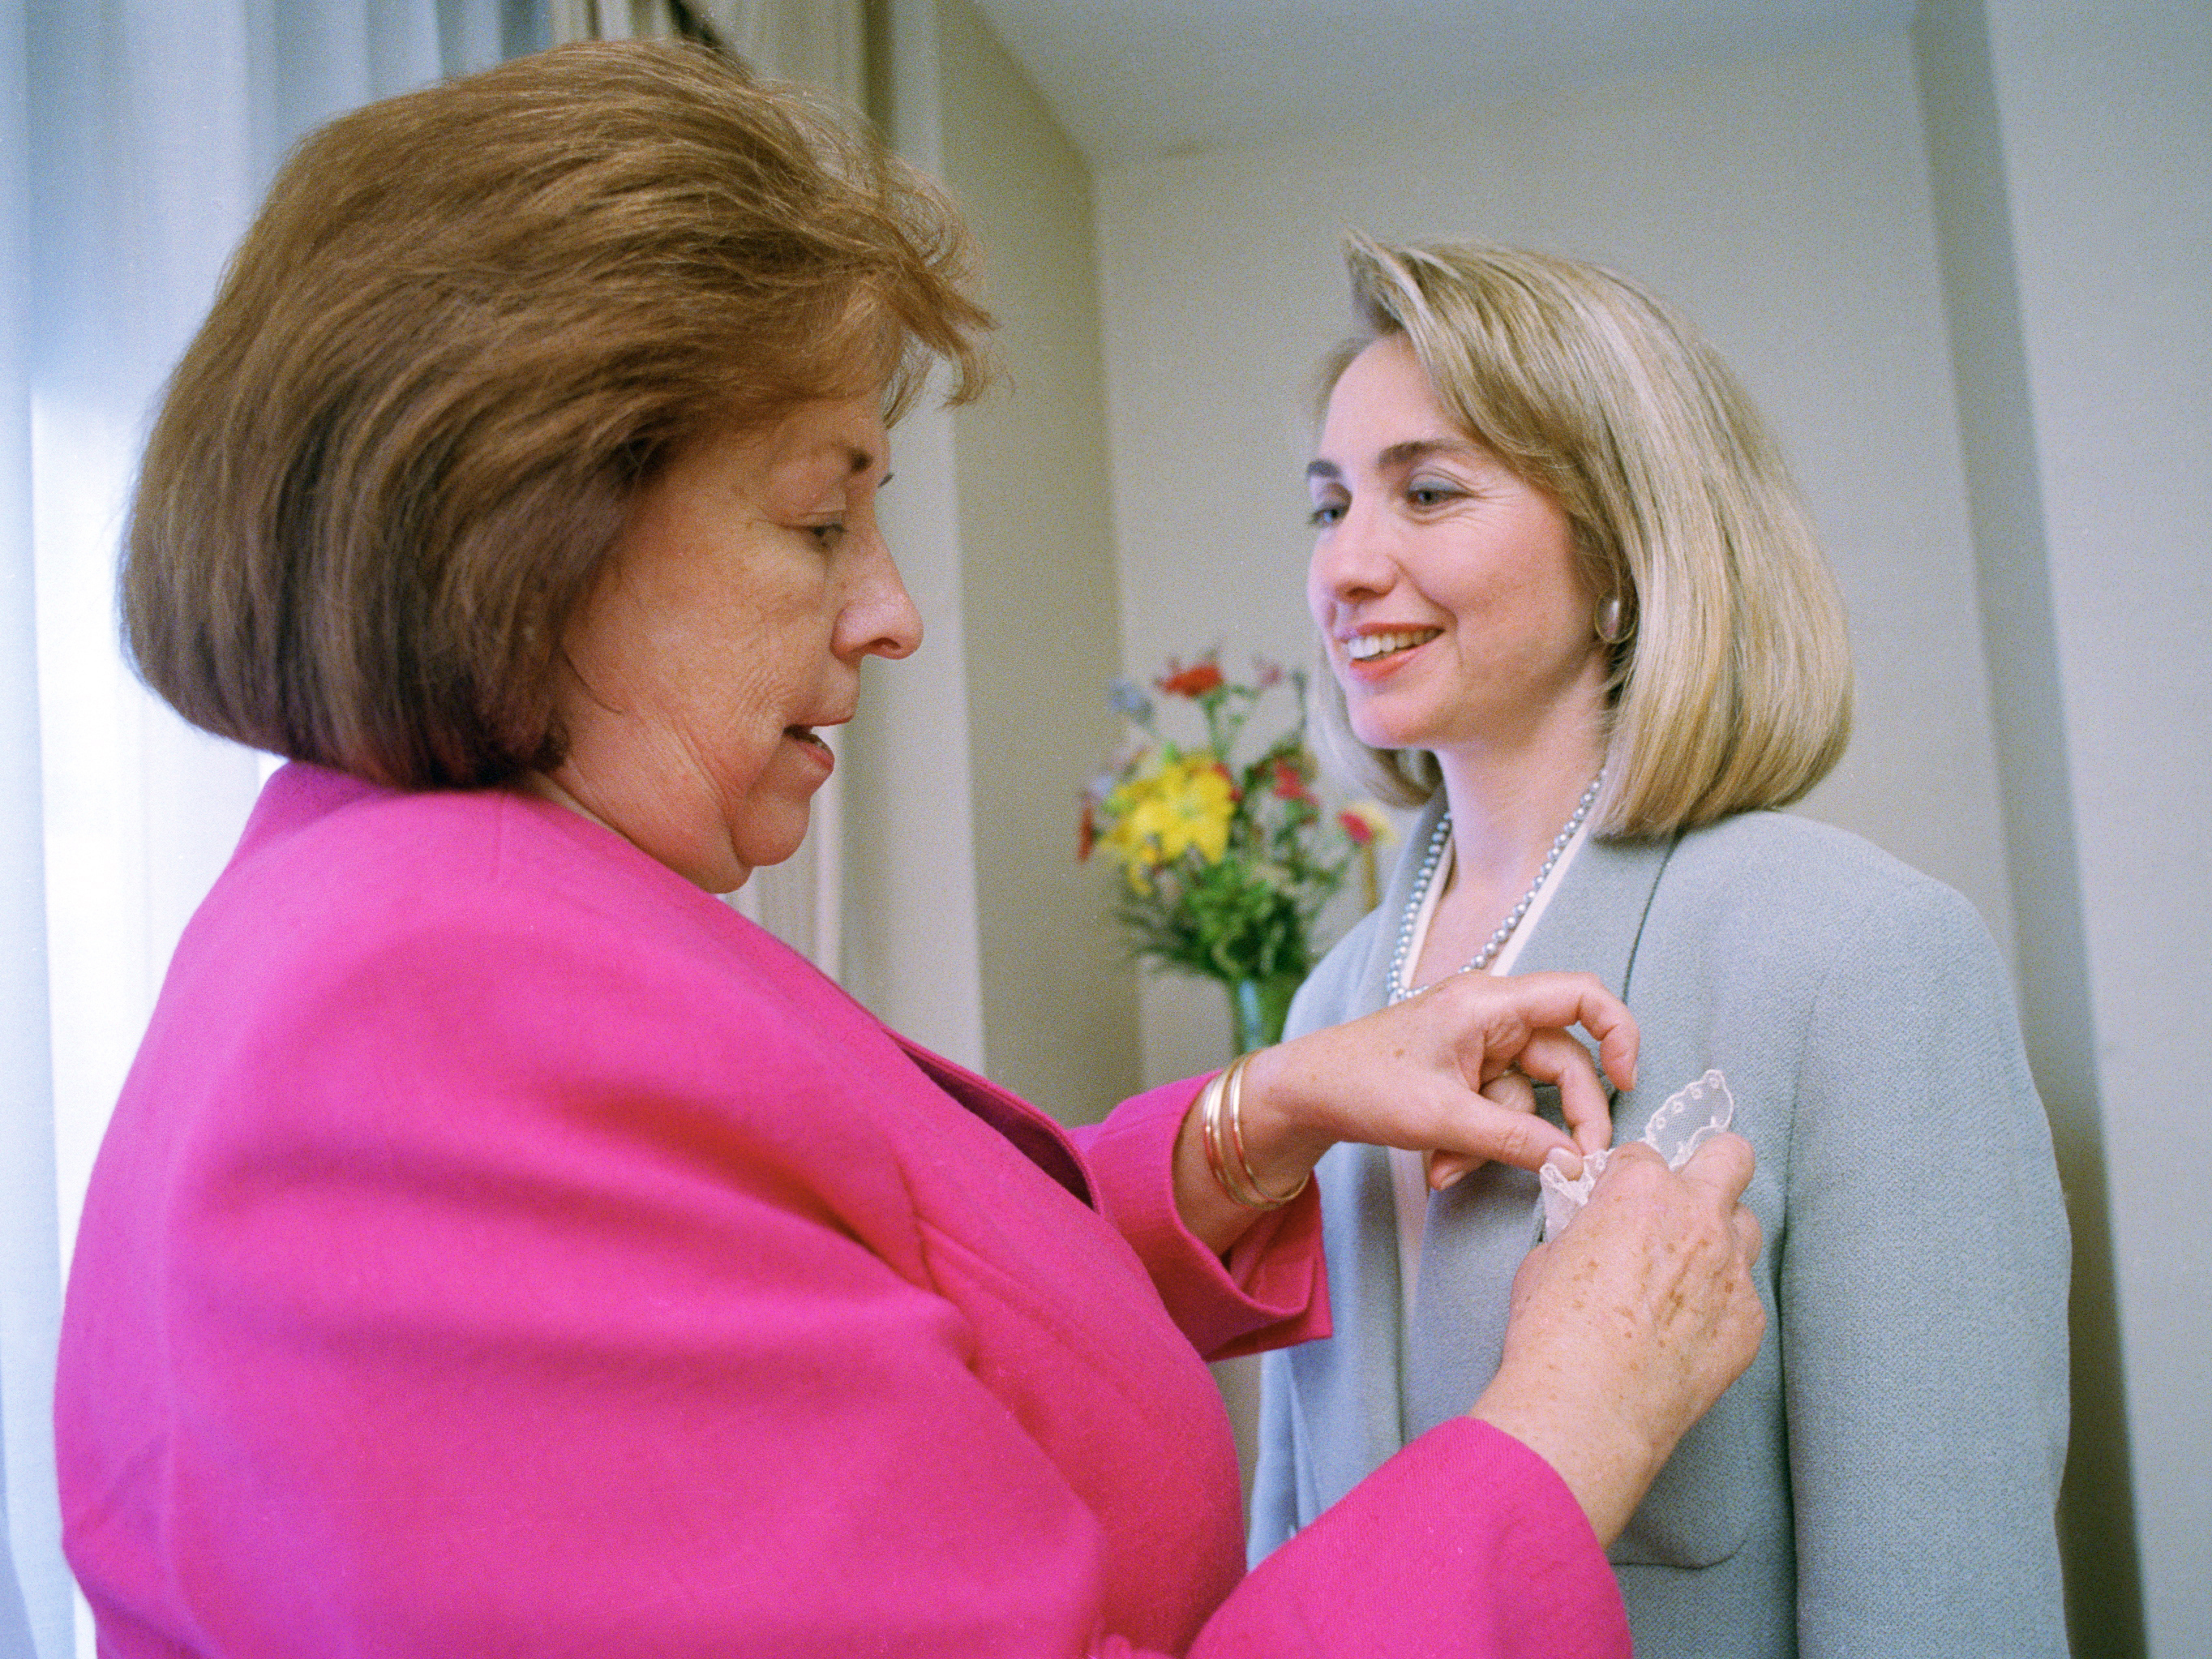 In her official presidential kickoff on Saturday, Hillary Clinton will tell how her mother, the late Dorothy Rodham, influenced who she is today. (Photo by Ron Frehm/Associated Press)